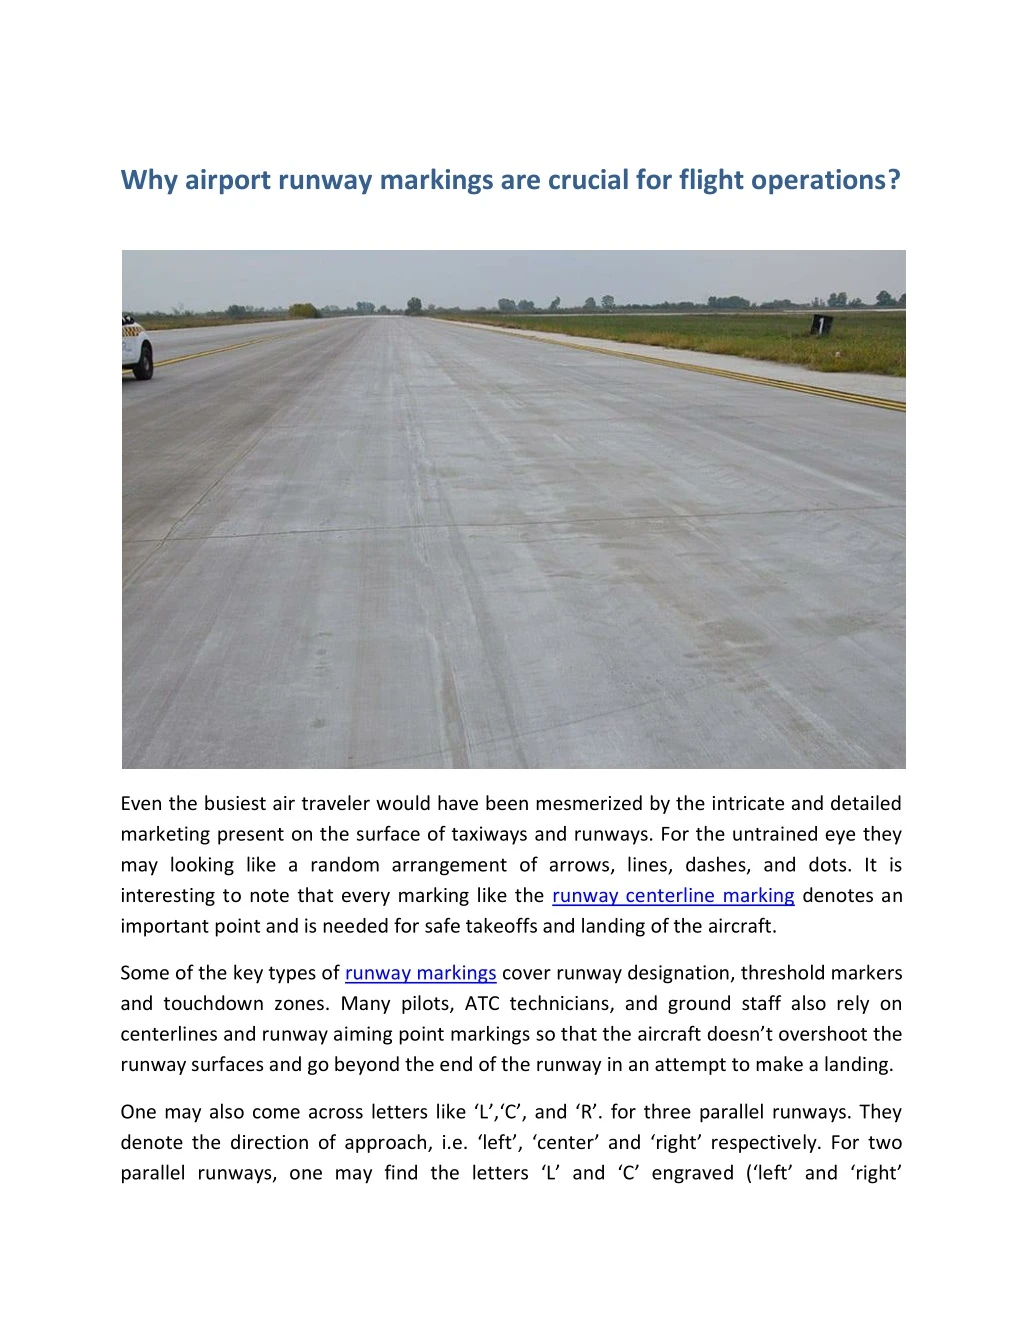 why airport runway markings are crucial